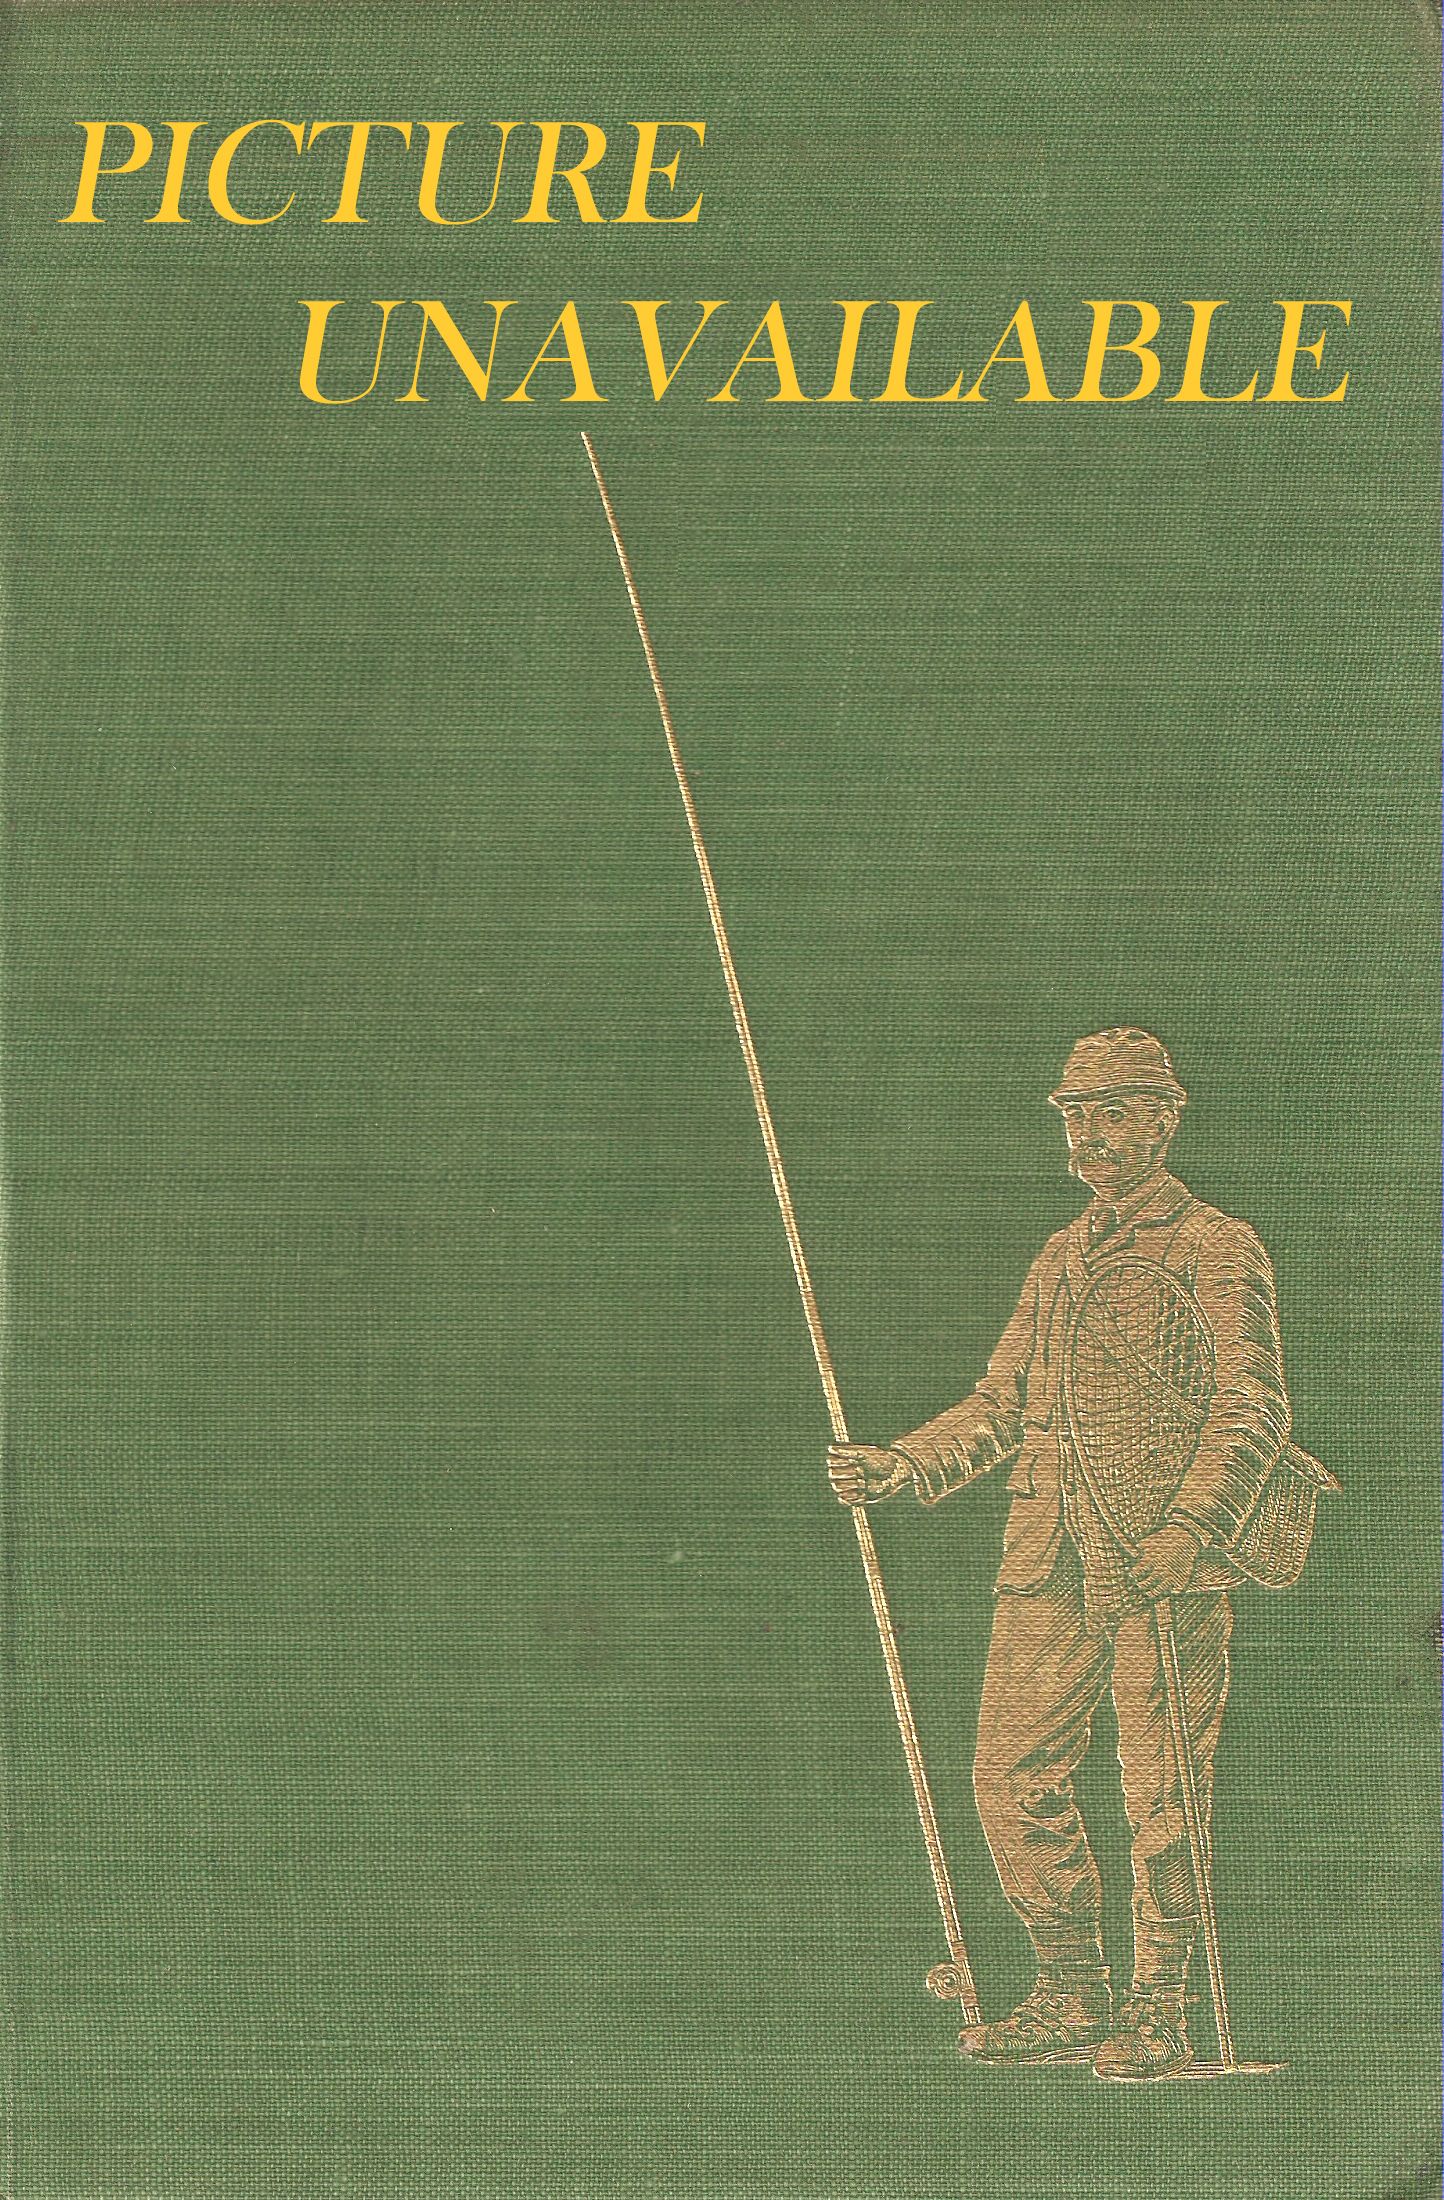 GREAT FISHING TACKLE CATALOGS OF THE GOLDEN AGE. Edited by Samuel Melner  and Hermann Kessler.